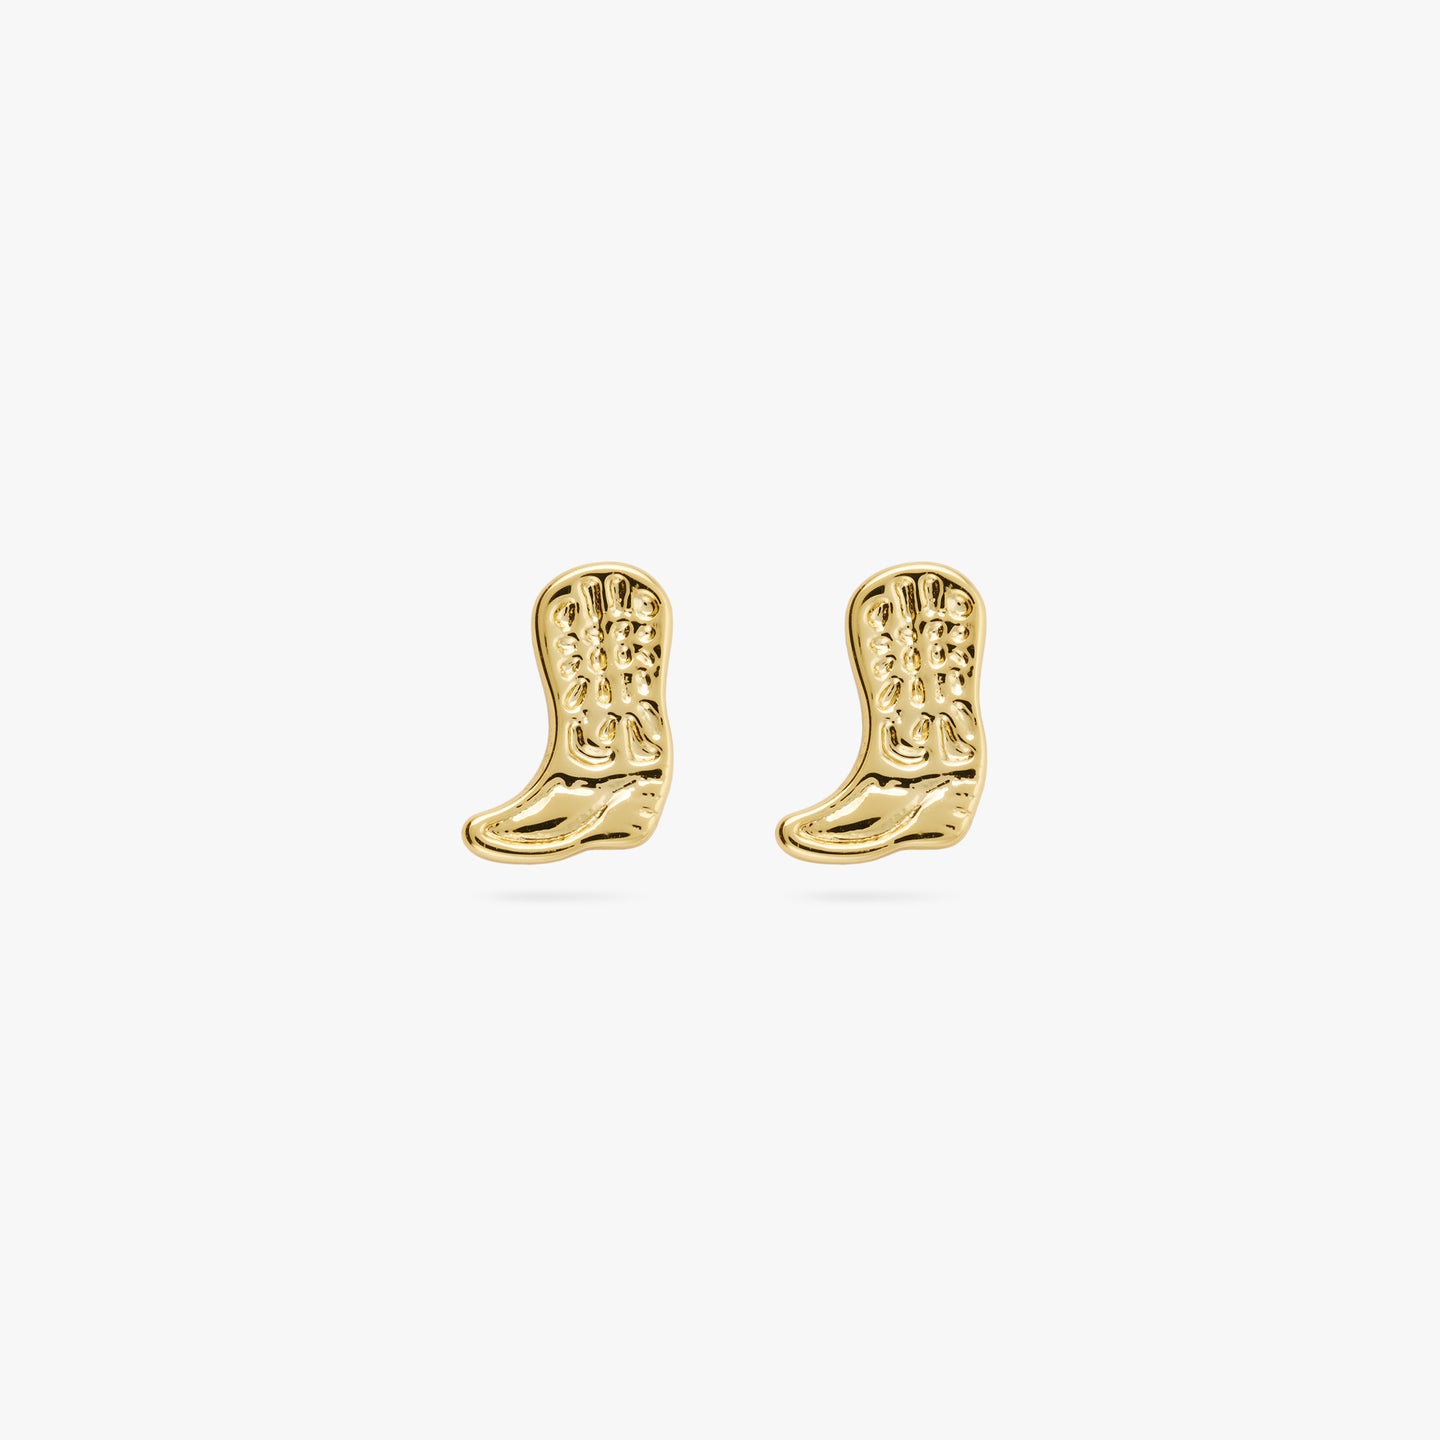 This is a pair of small gold cowboy boot shaped studs with detailing [pair] color:null|gold